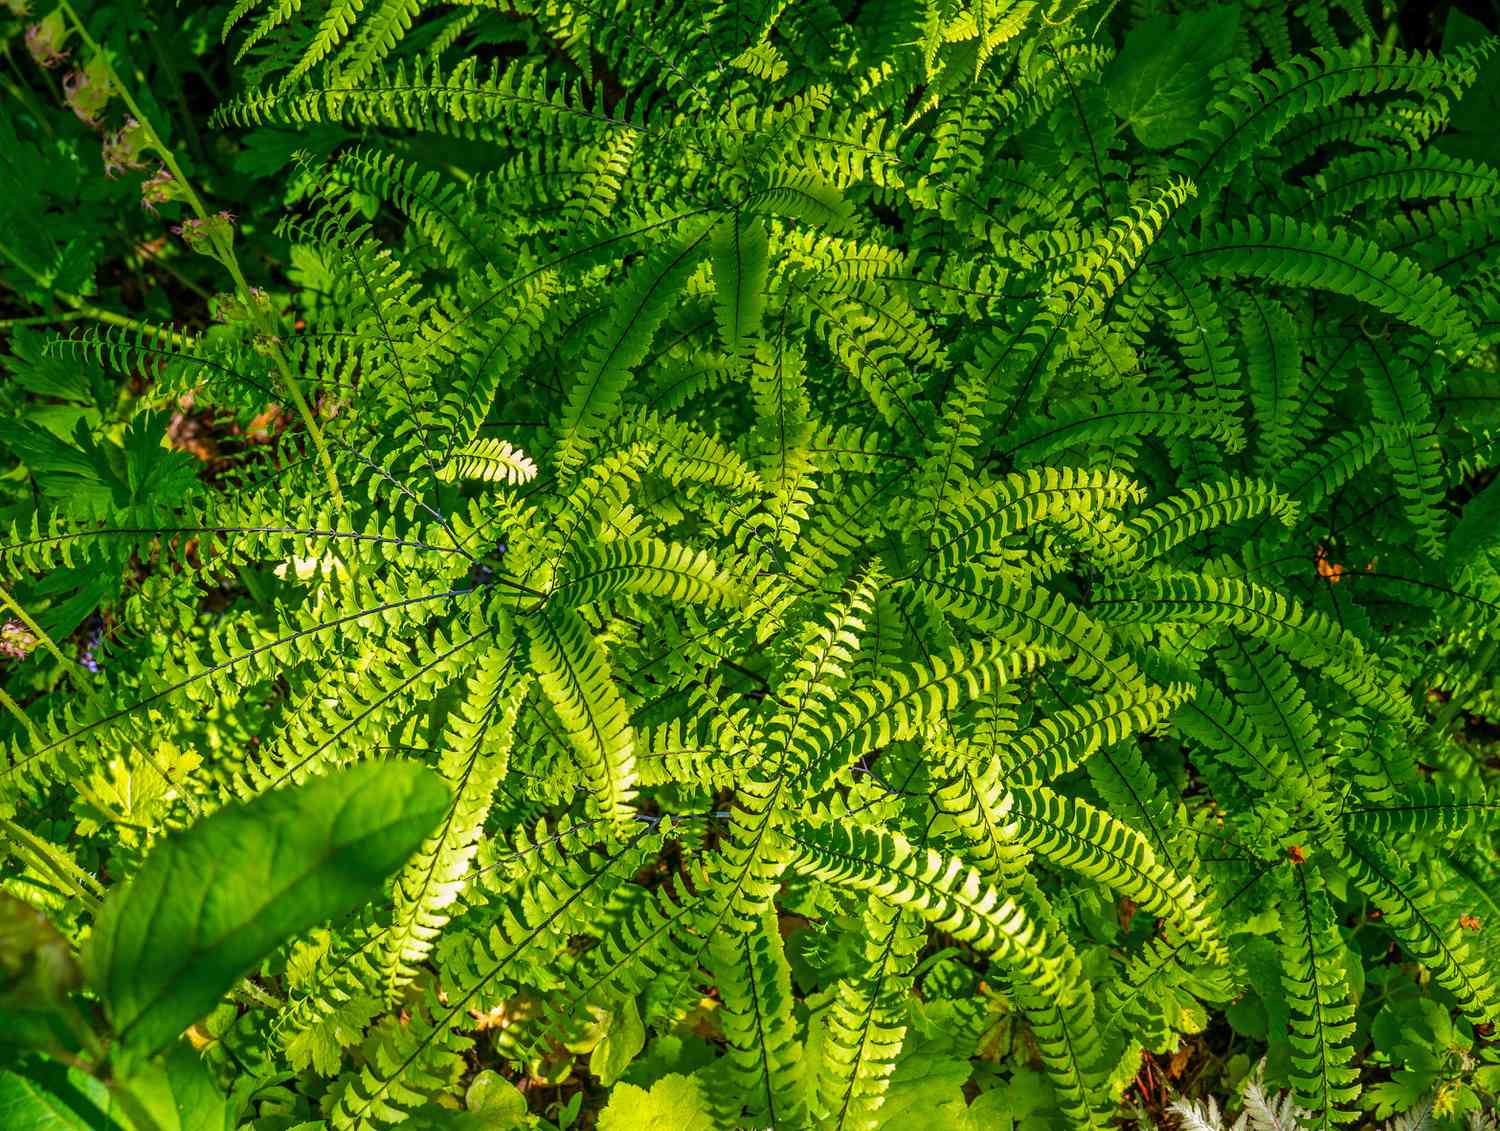 Japanese holly fern fronds from above